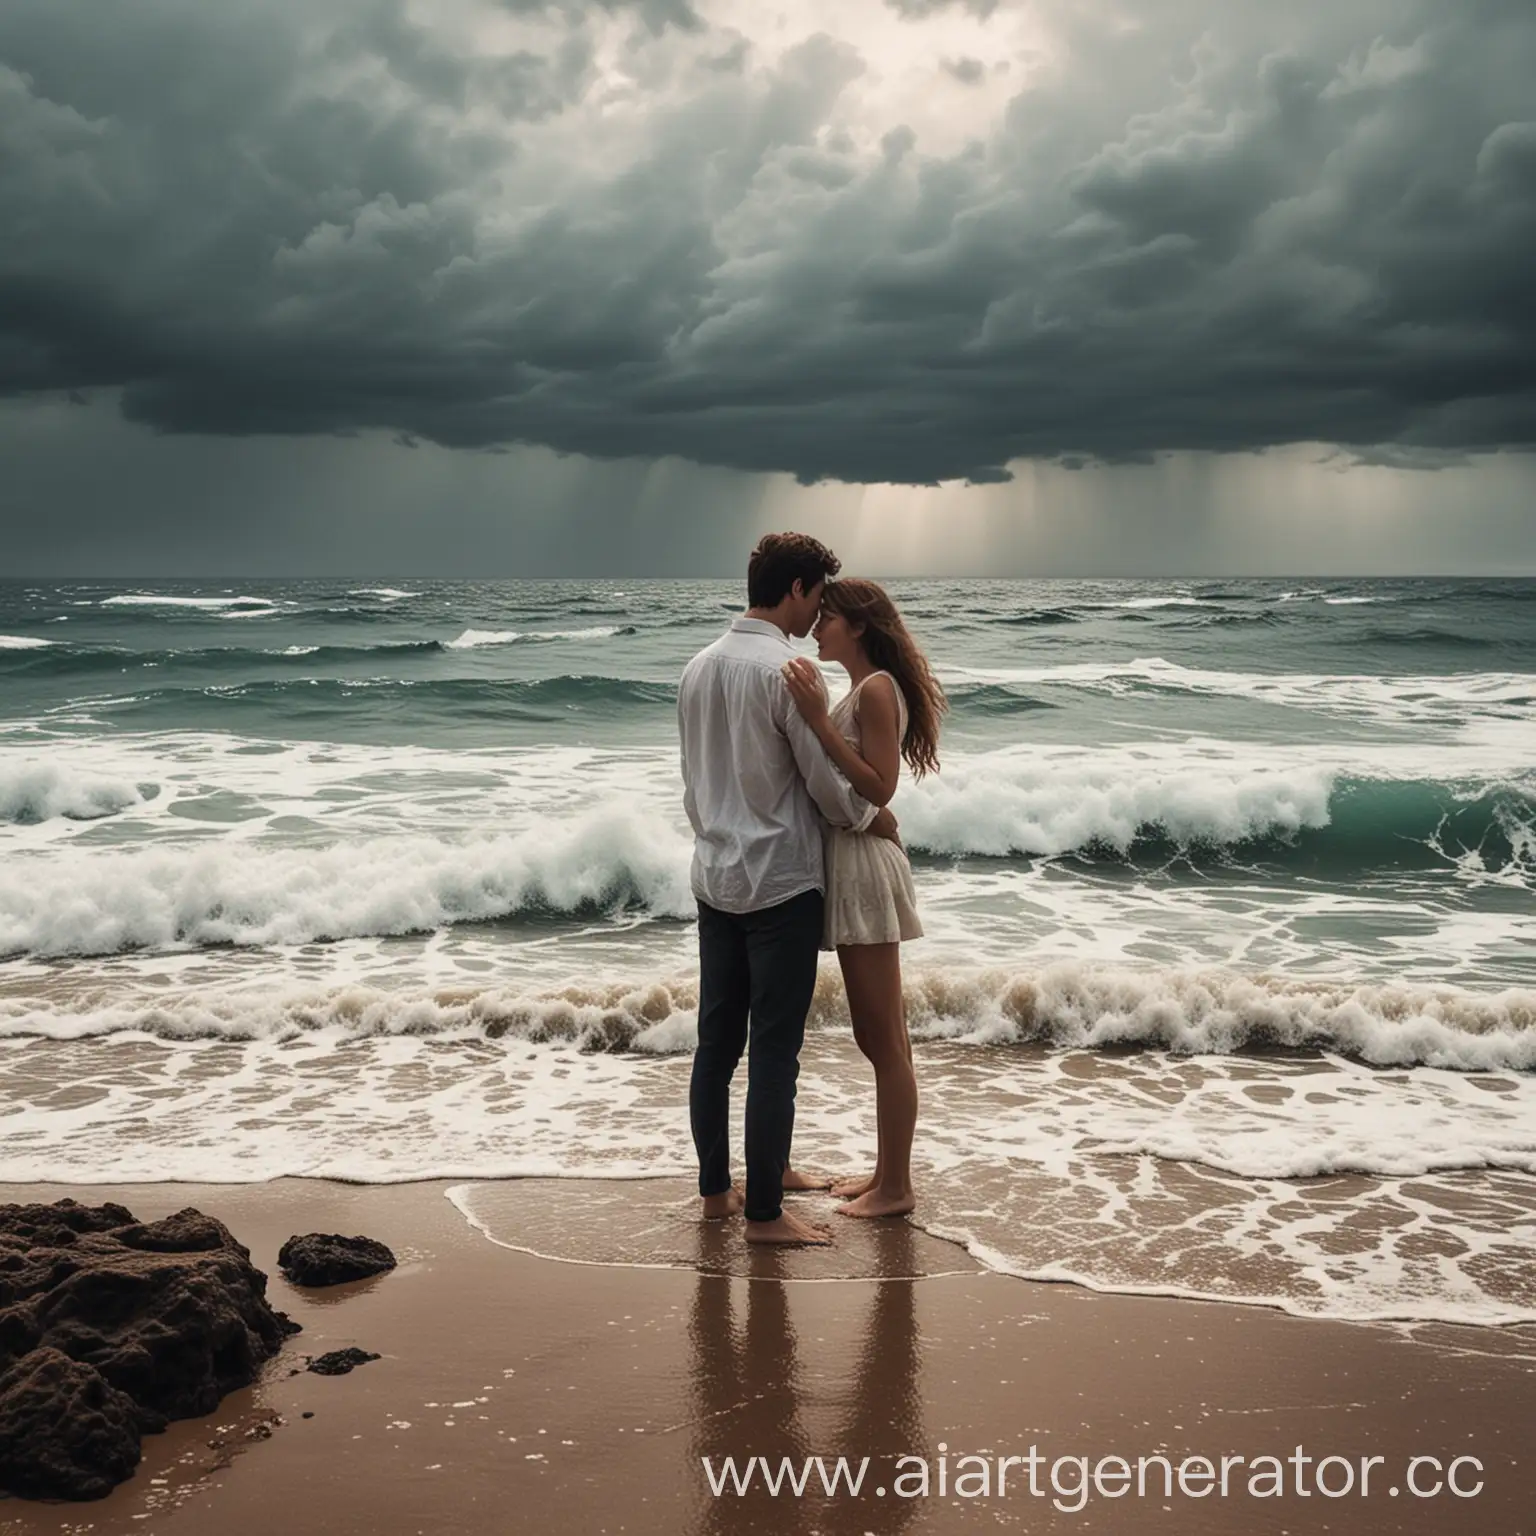 Romantic-Couple-Embracing-on-Stormy-Ocean-Shore